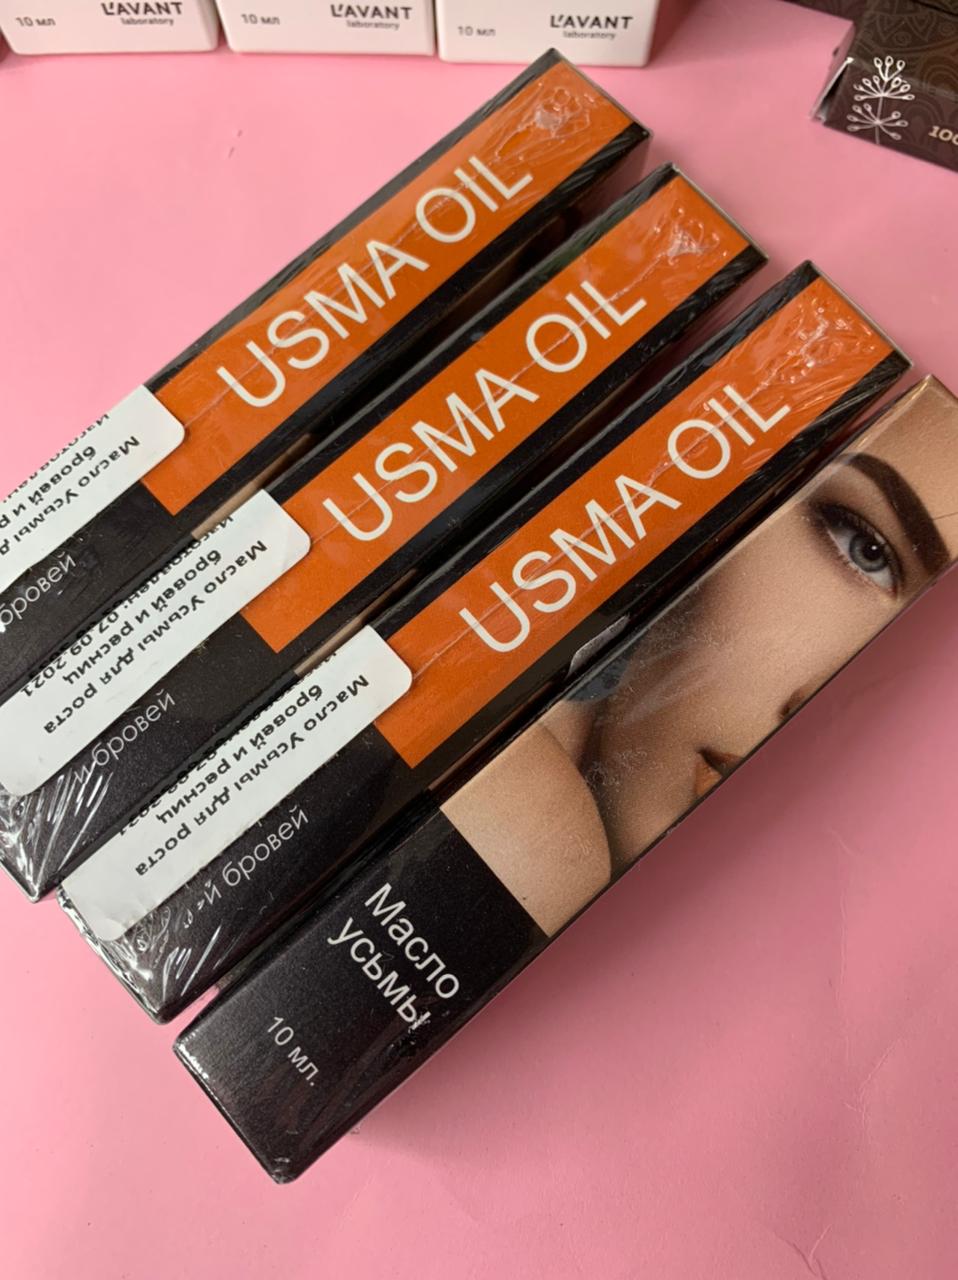 Usma oil for eyelashes and eyebrows by Deotone 10ml